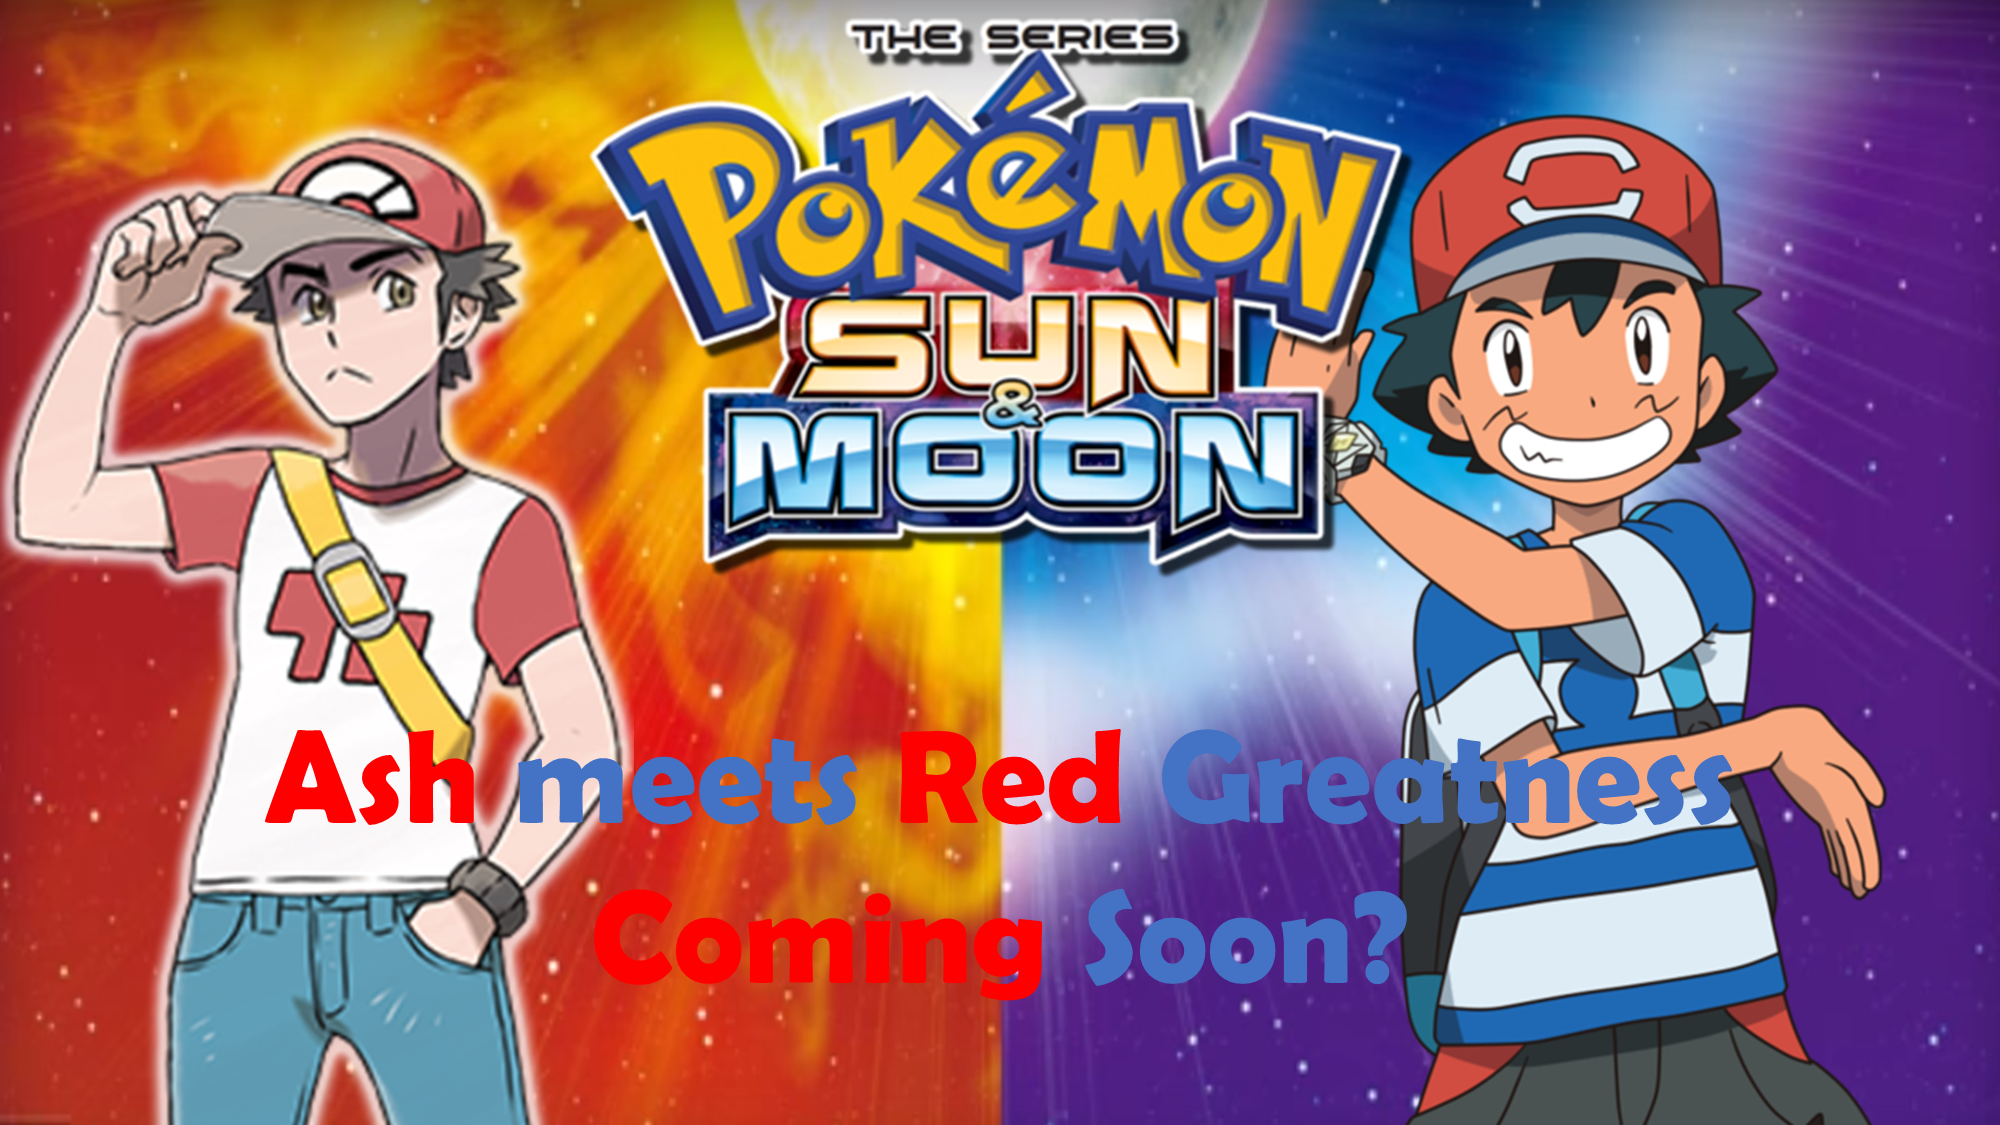 User blog:A1M2O3U4R5/Pokemon Sun and Moon Coming Soon! Ash meets Red  Greatness?!? | Pokémon Wiki